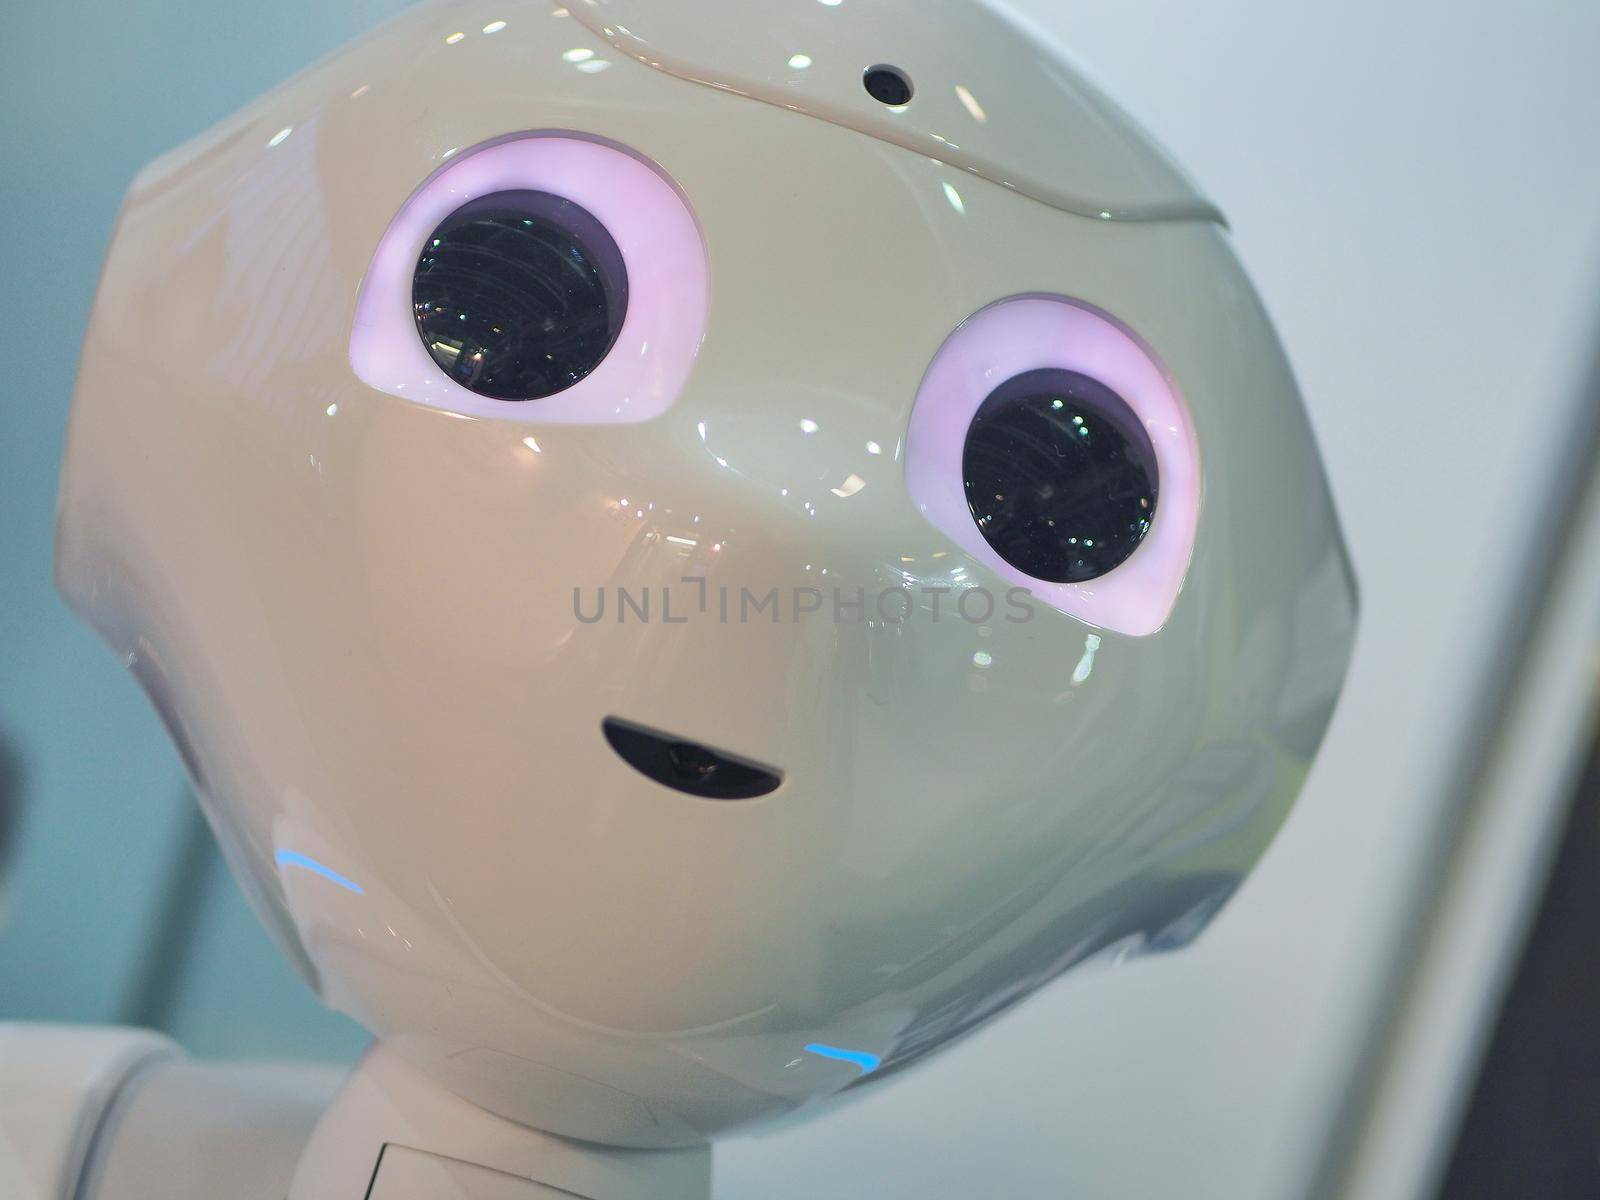 Pepper by SoftBank Robotics the first humanoid assistant for better customer experience interacting with people Turin Italy February 12 2020